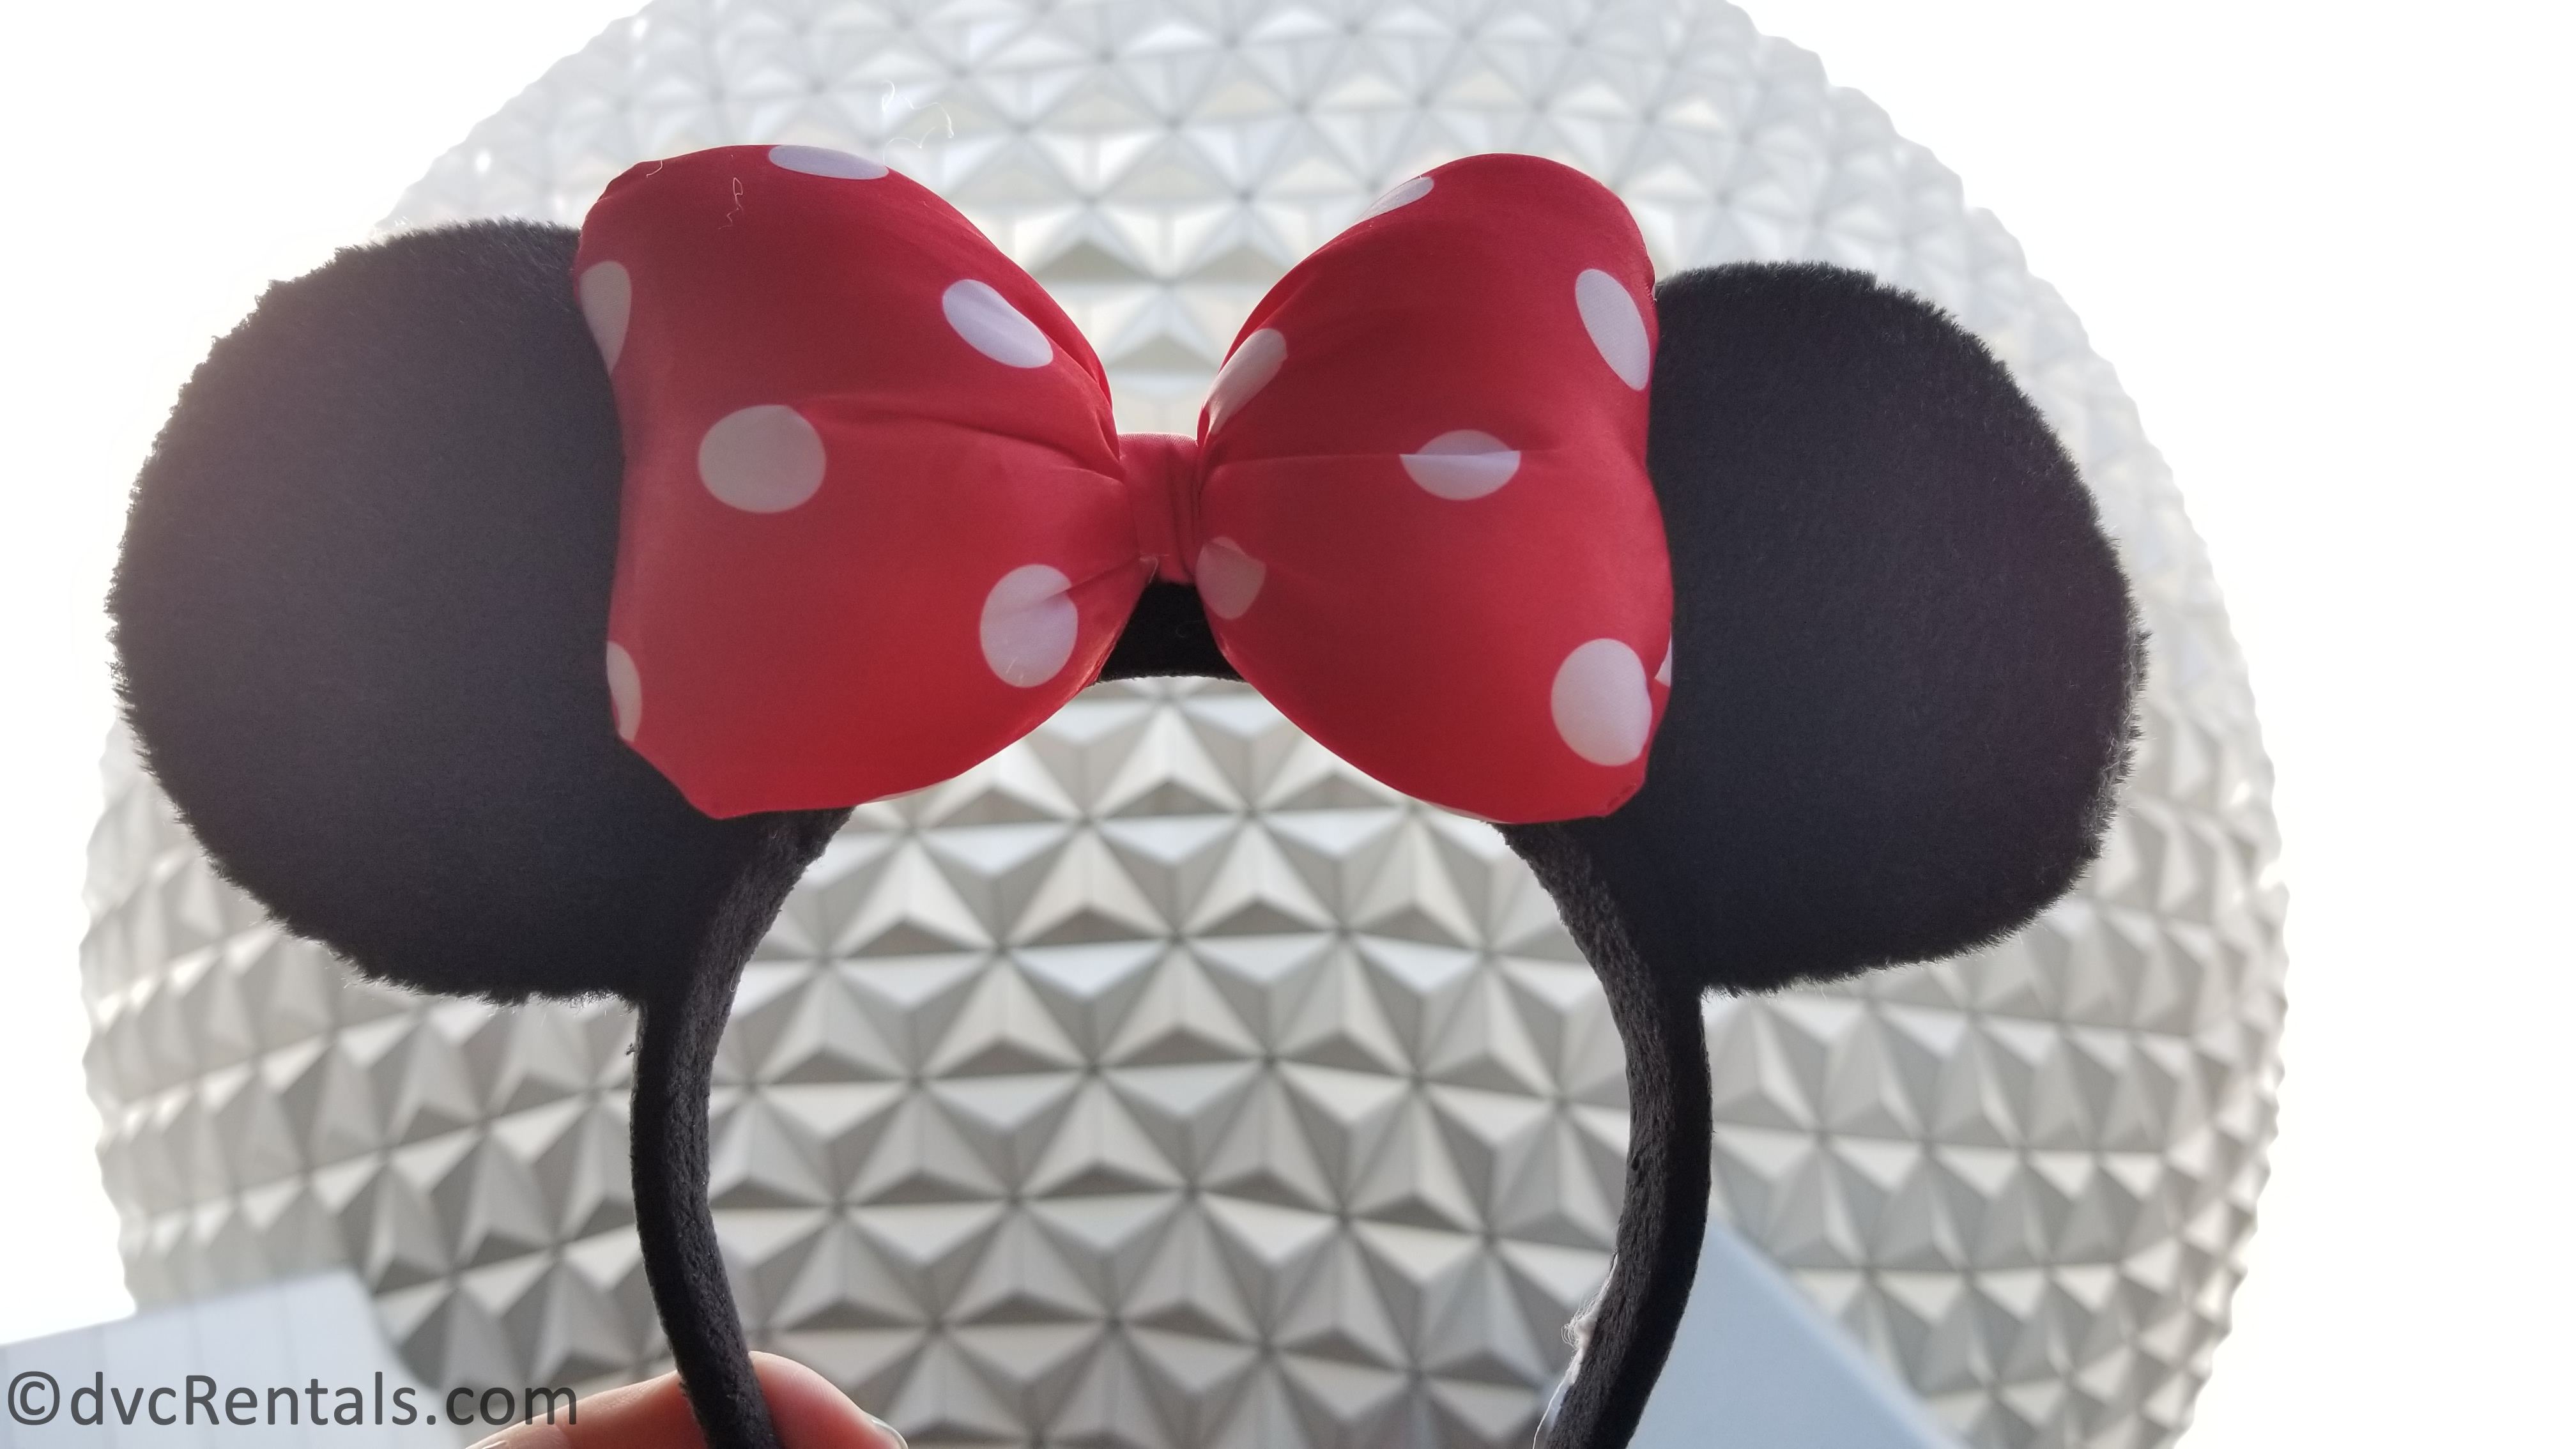 Picture of Minnie Ears and Spaceship Earth at Epcot